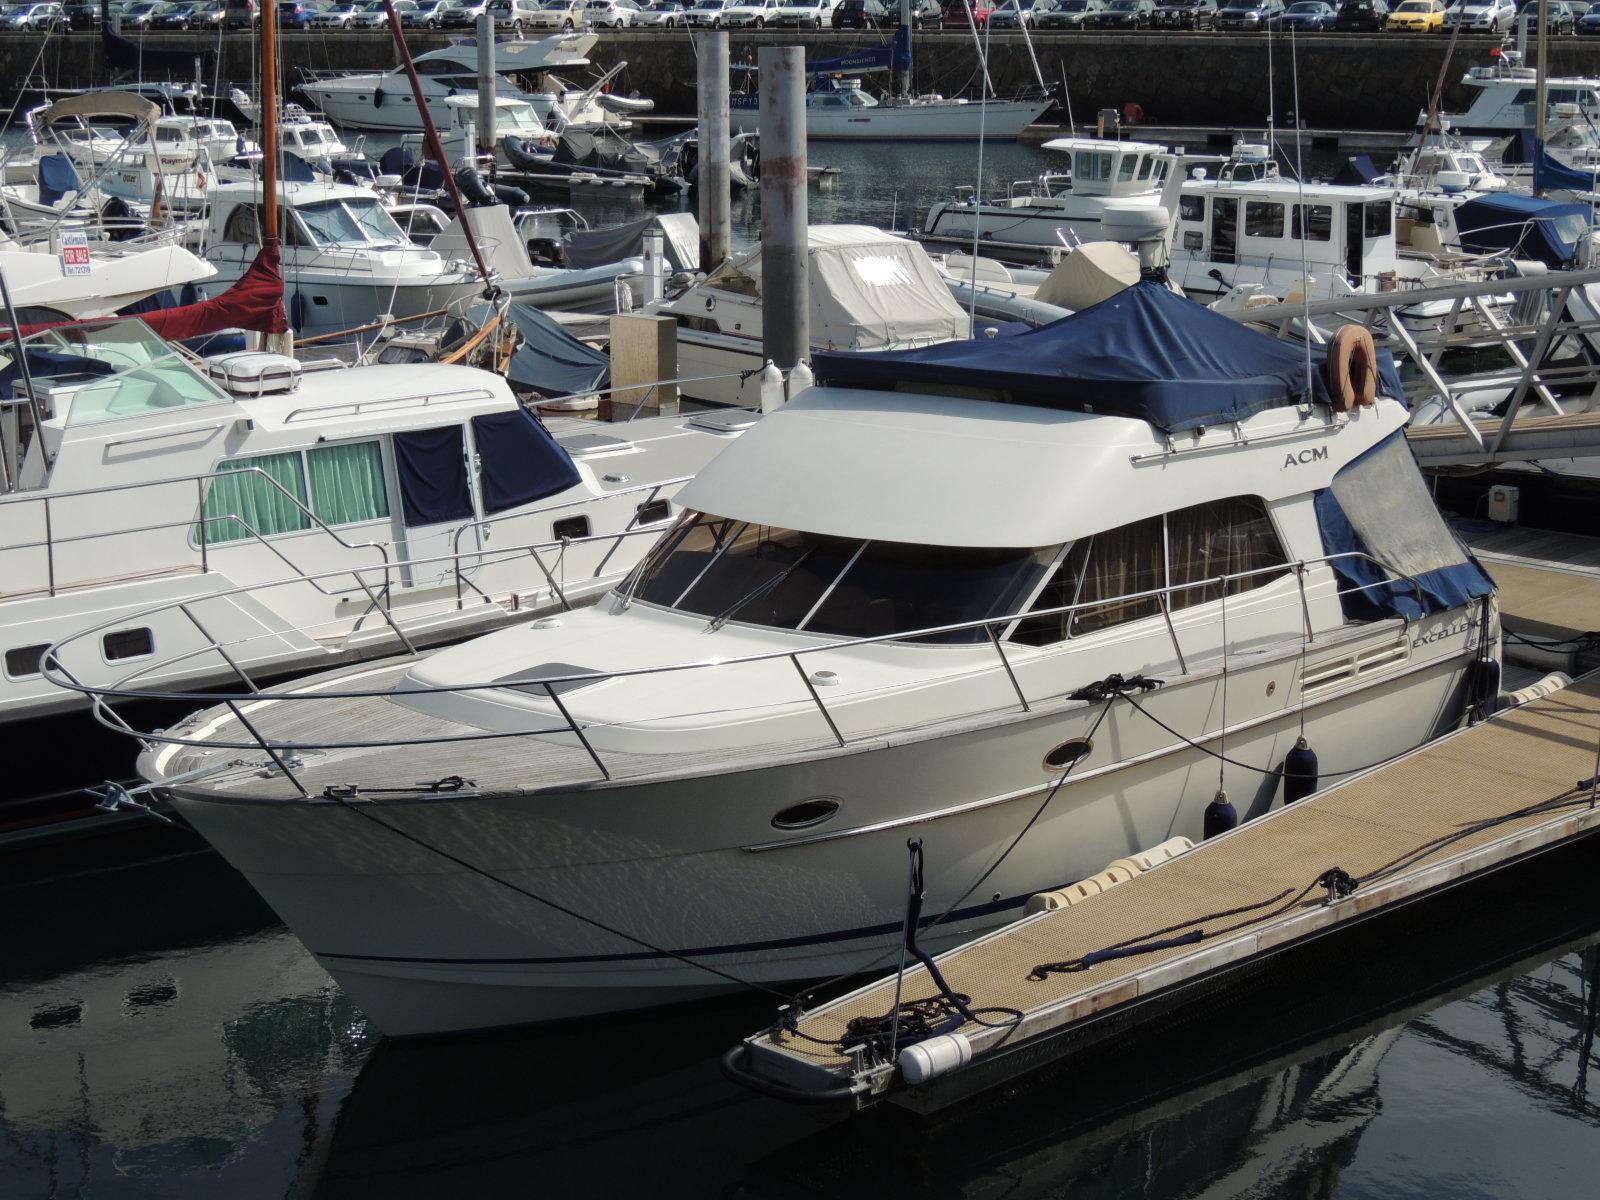 ACM Excellence 38, Channel Islands